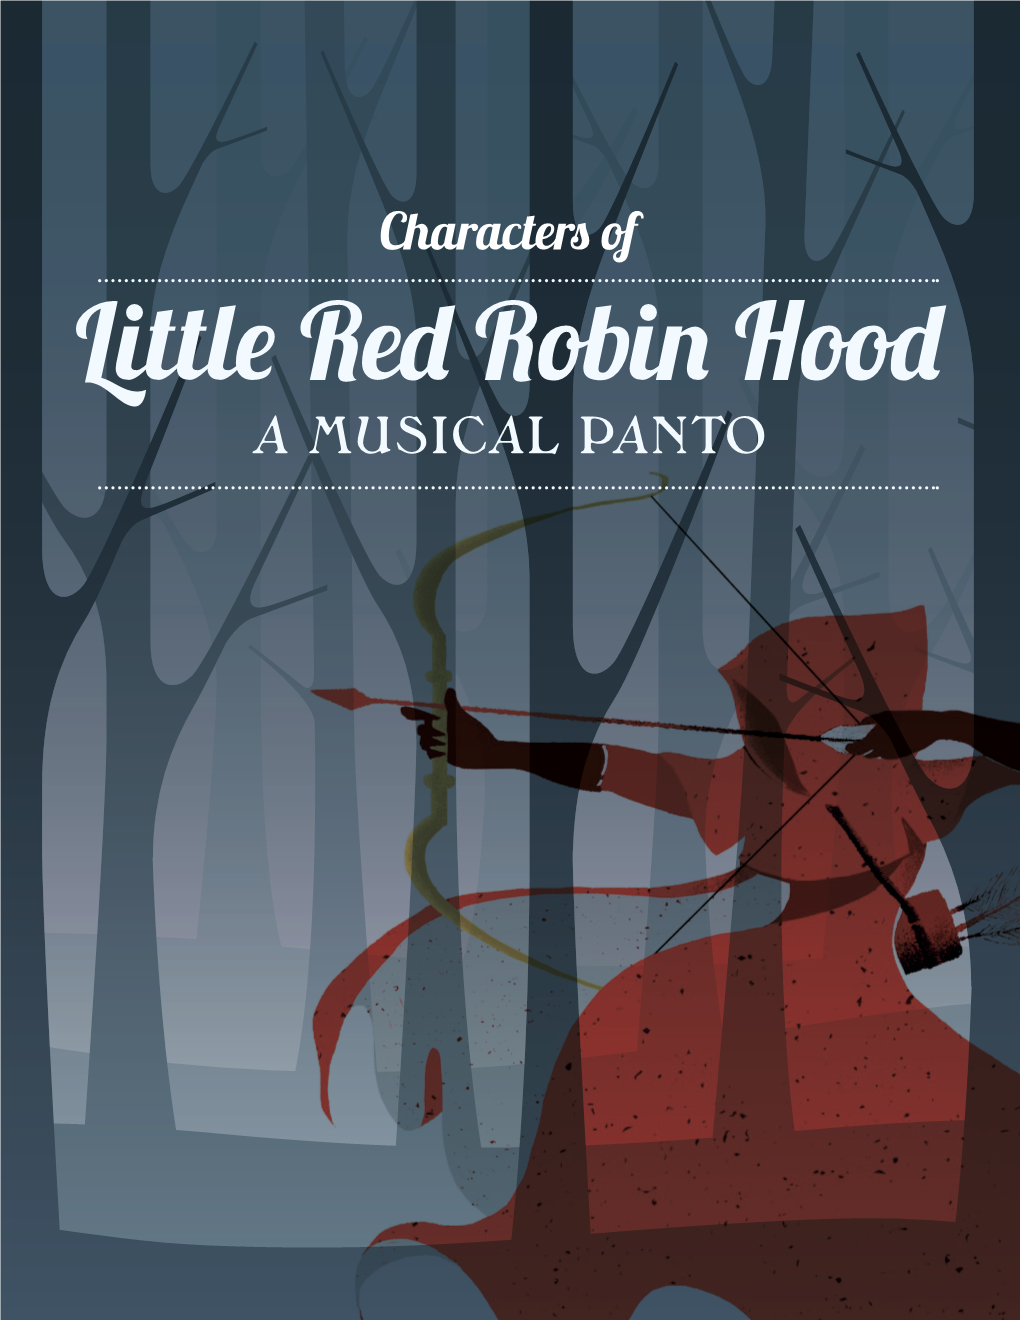 Little Red Robin Hood CHARACTER SCHEDULE